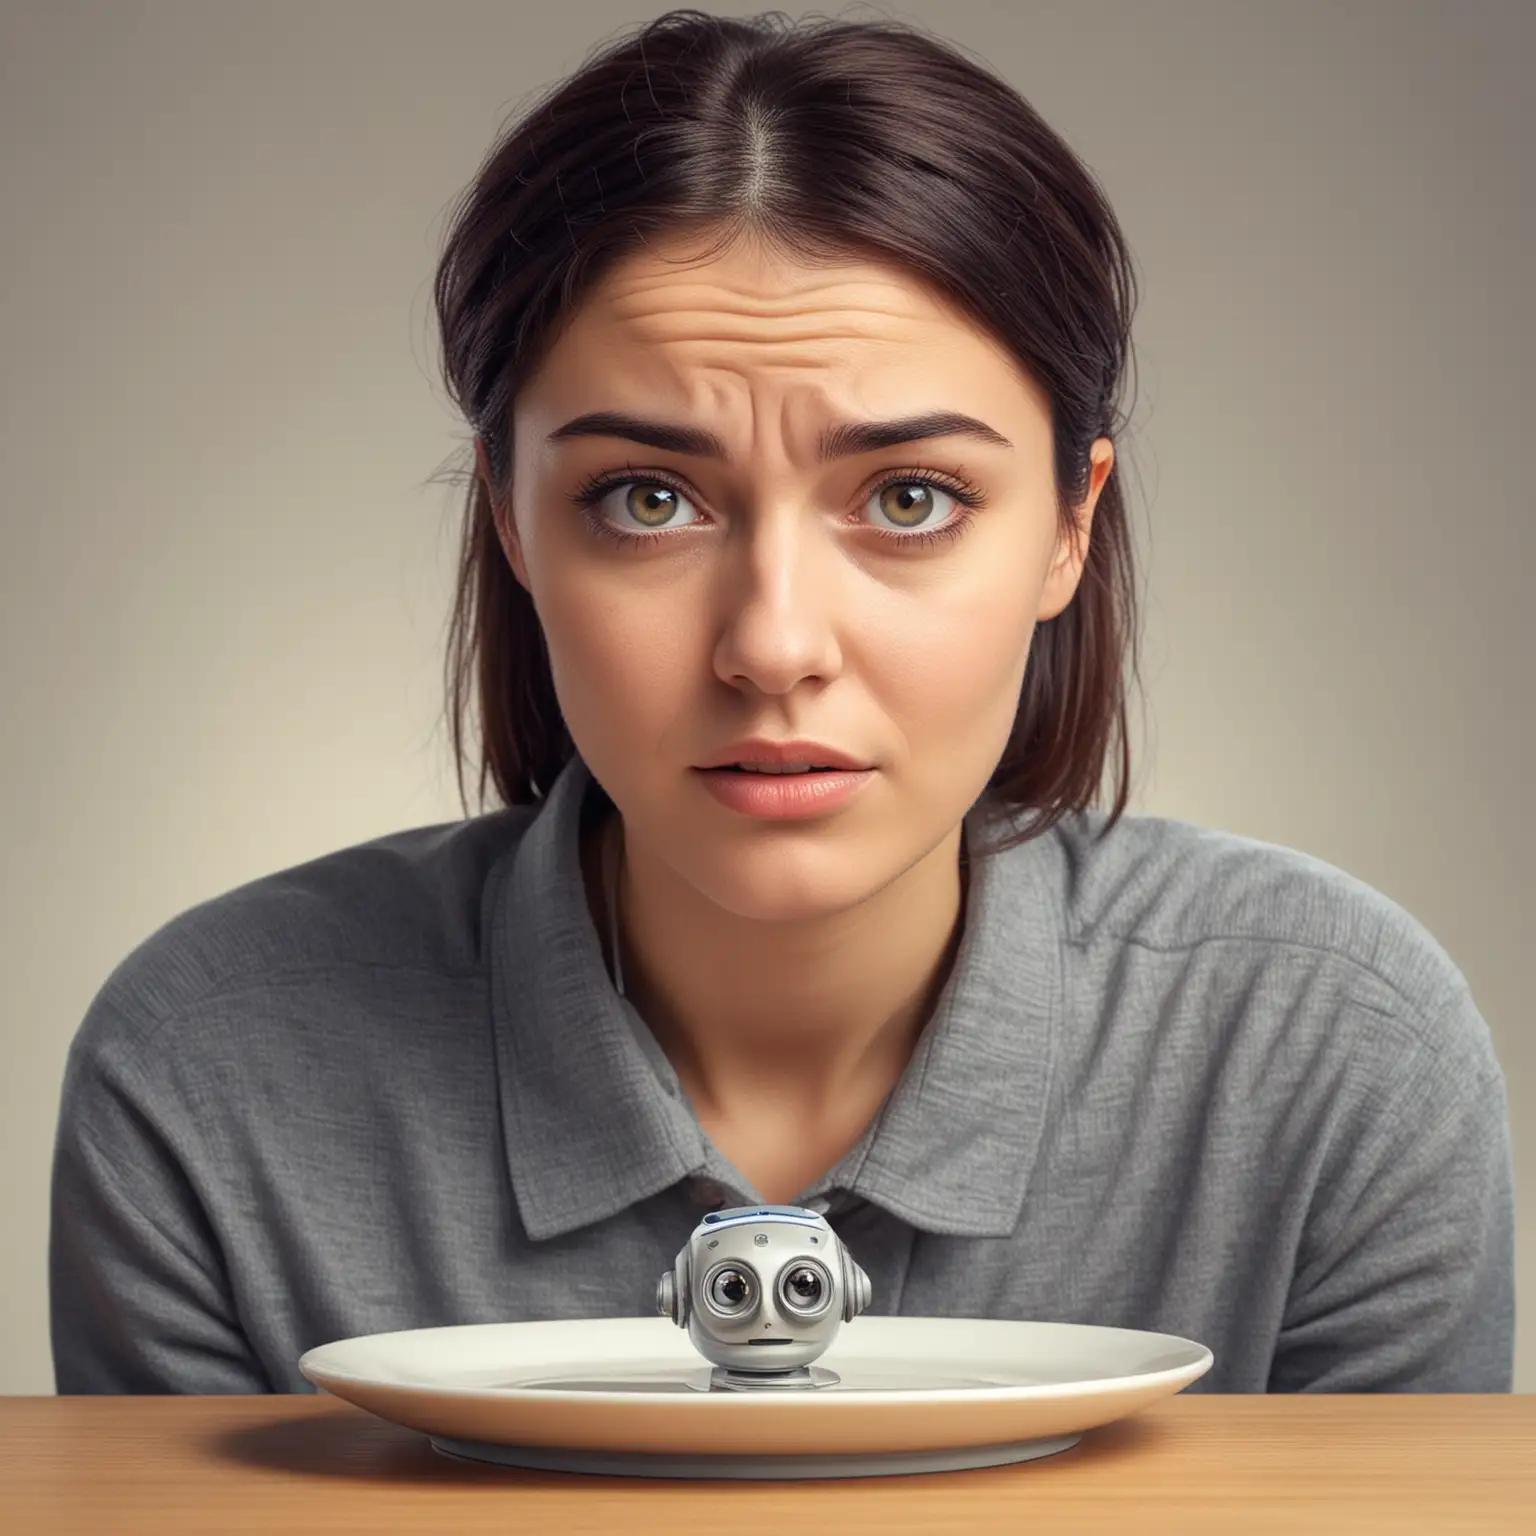 a woman with a dissatisfied look rejecting an overflowing plate of chatbots eye level perspective
--ar 2:3 --sref https://s.mj.run/87Sjf94hFiI ::1.5 <https://s.mj.run/BdQFQve9VPQ>
